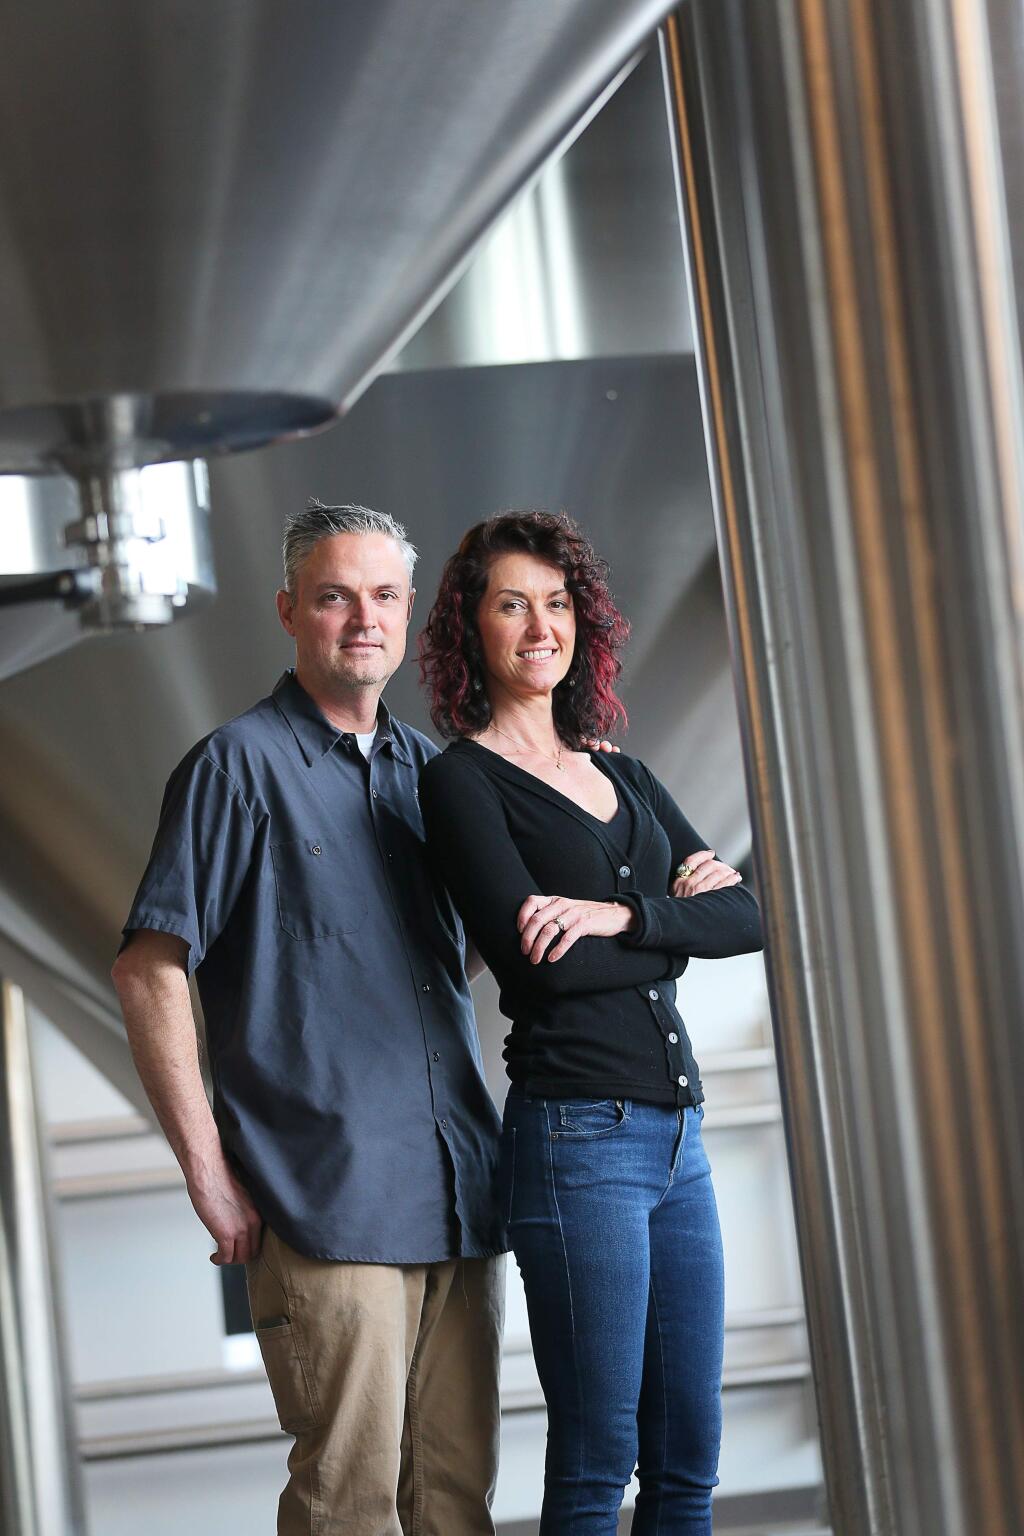 Russian River Brewing Company owners Vinnie and Natalie Cilurzo are looking forward to releasing Pliny the Younger at their new Windsor location for the first time, in addition to their downtown Santa Rosa location.(Christopher Chung/ The Press Democrat)